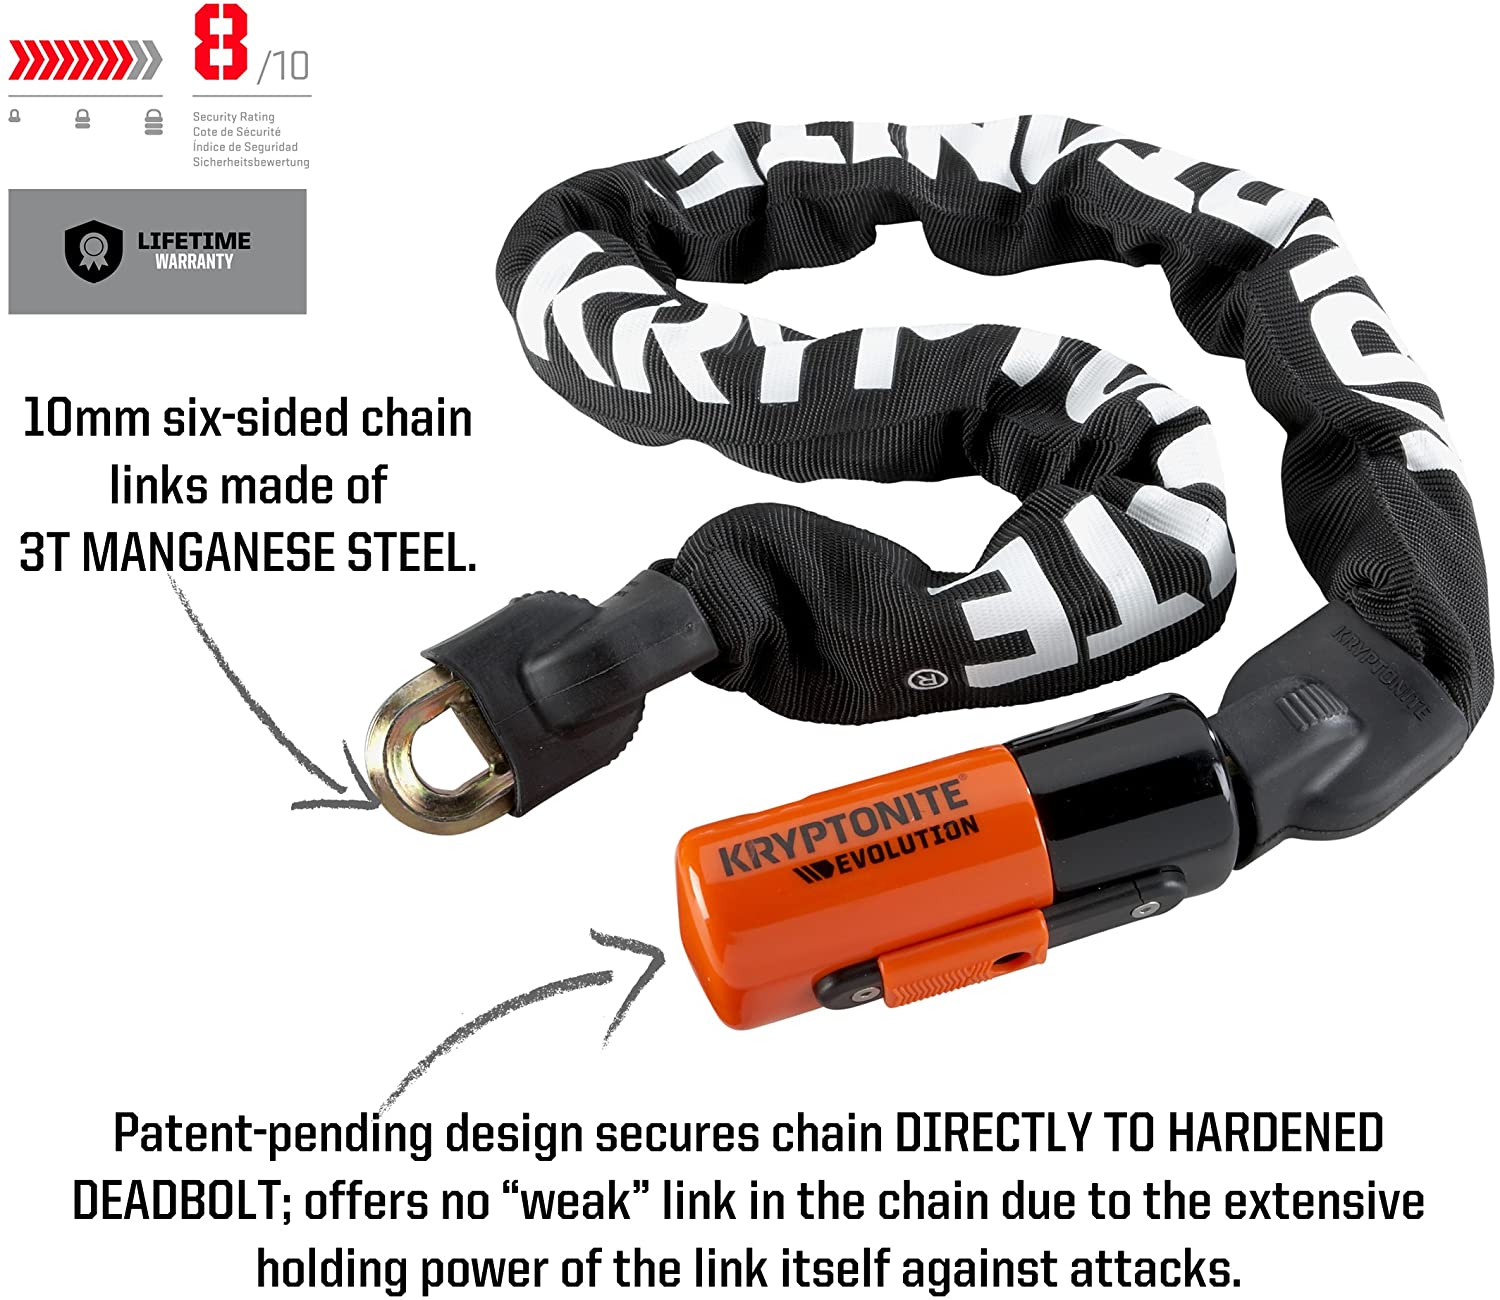 Kryptonite Evolution Series 4 1090 Integrated Chain Bicycle Lock - image 5 of 9